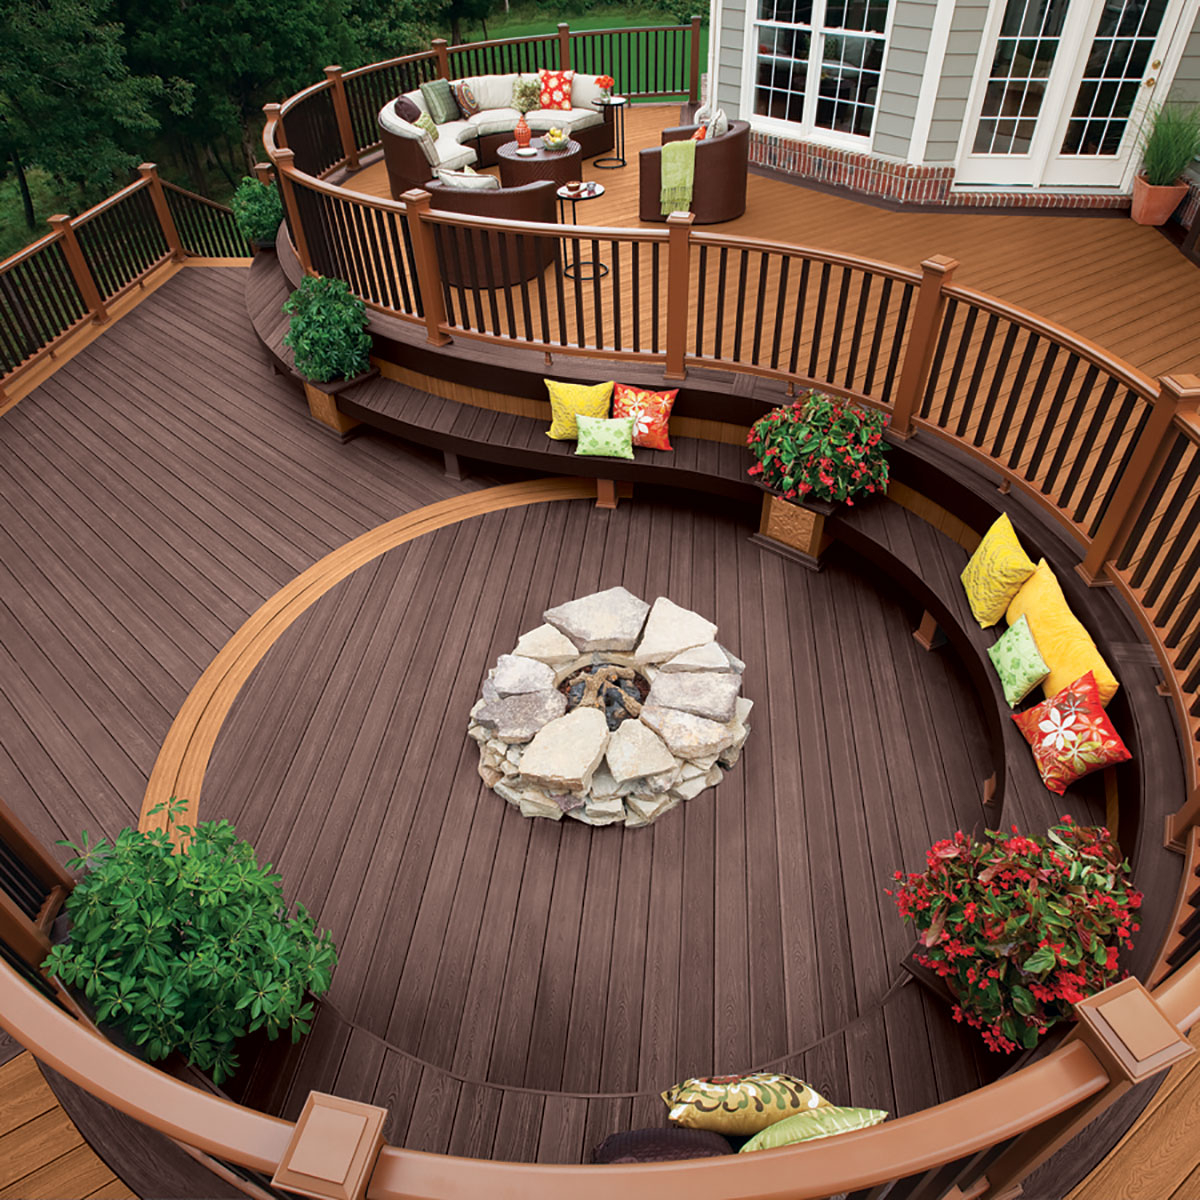 Tretranscend Composite Decking Wimsatt Building Materials Can You intended for size 1200 X 1200